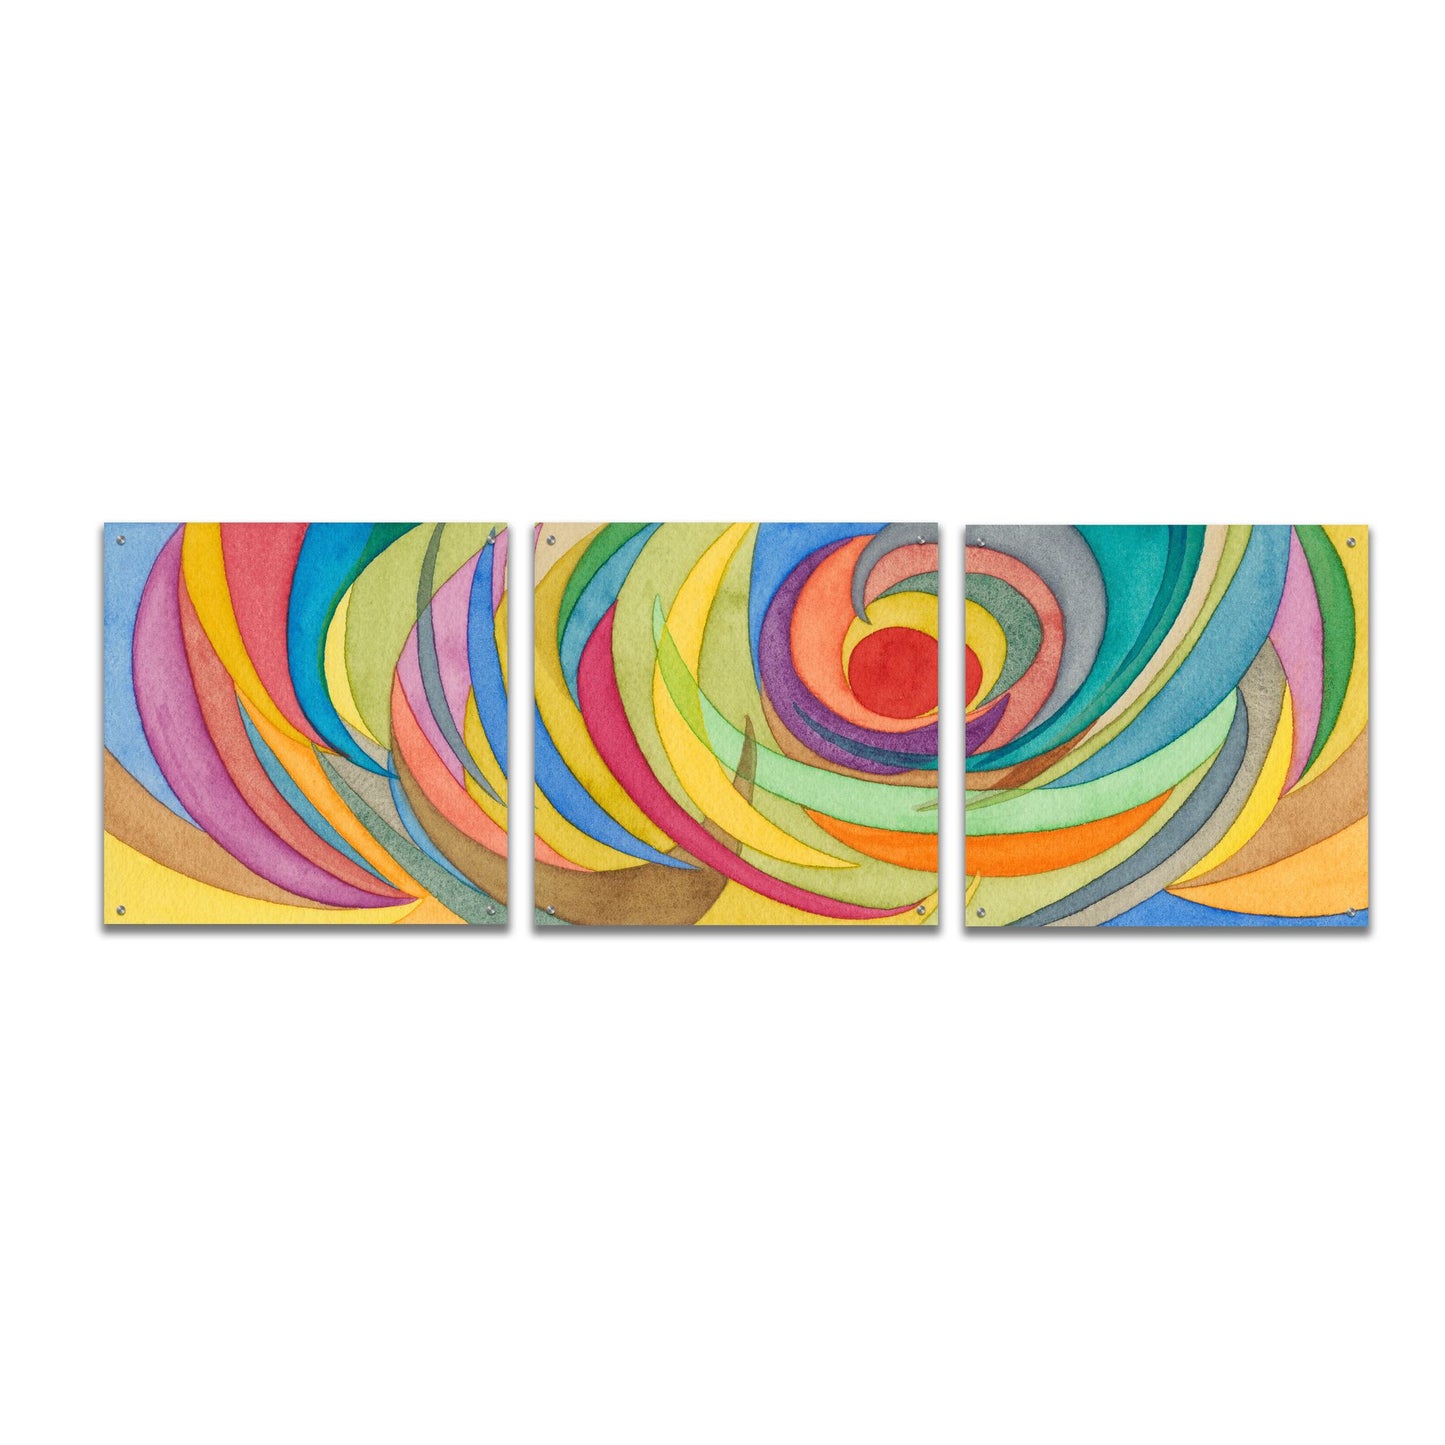 Epic Art 'Watercolor Arches I' by Nikki Galapon, Acrylic Glass Wall Art, 3 Piece Set